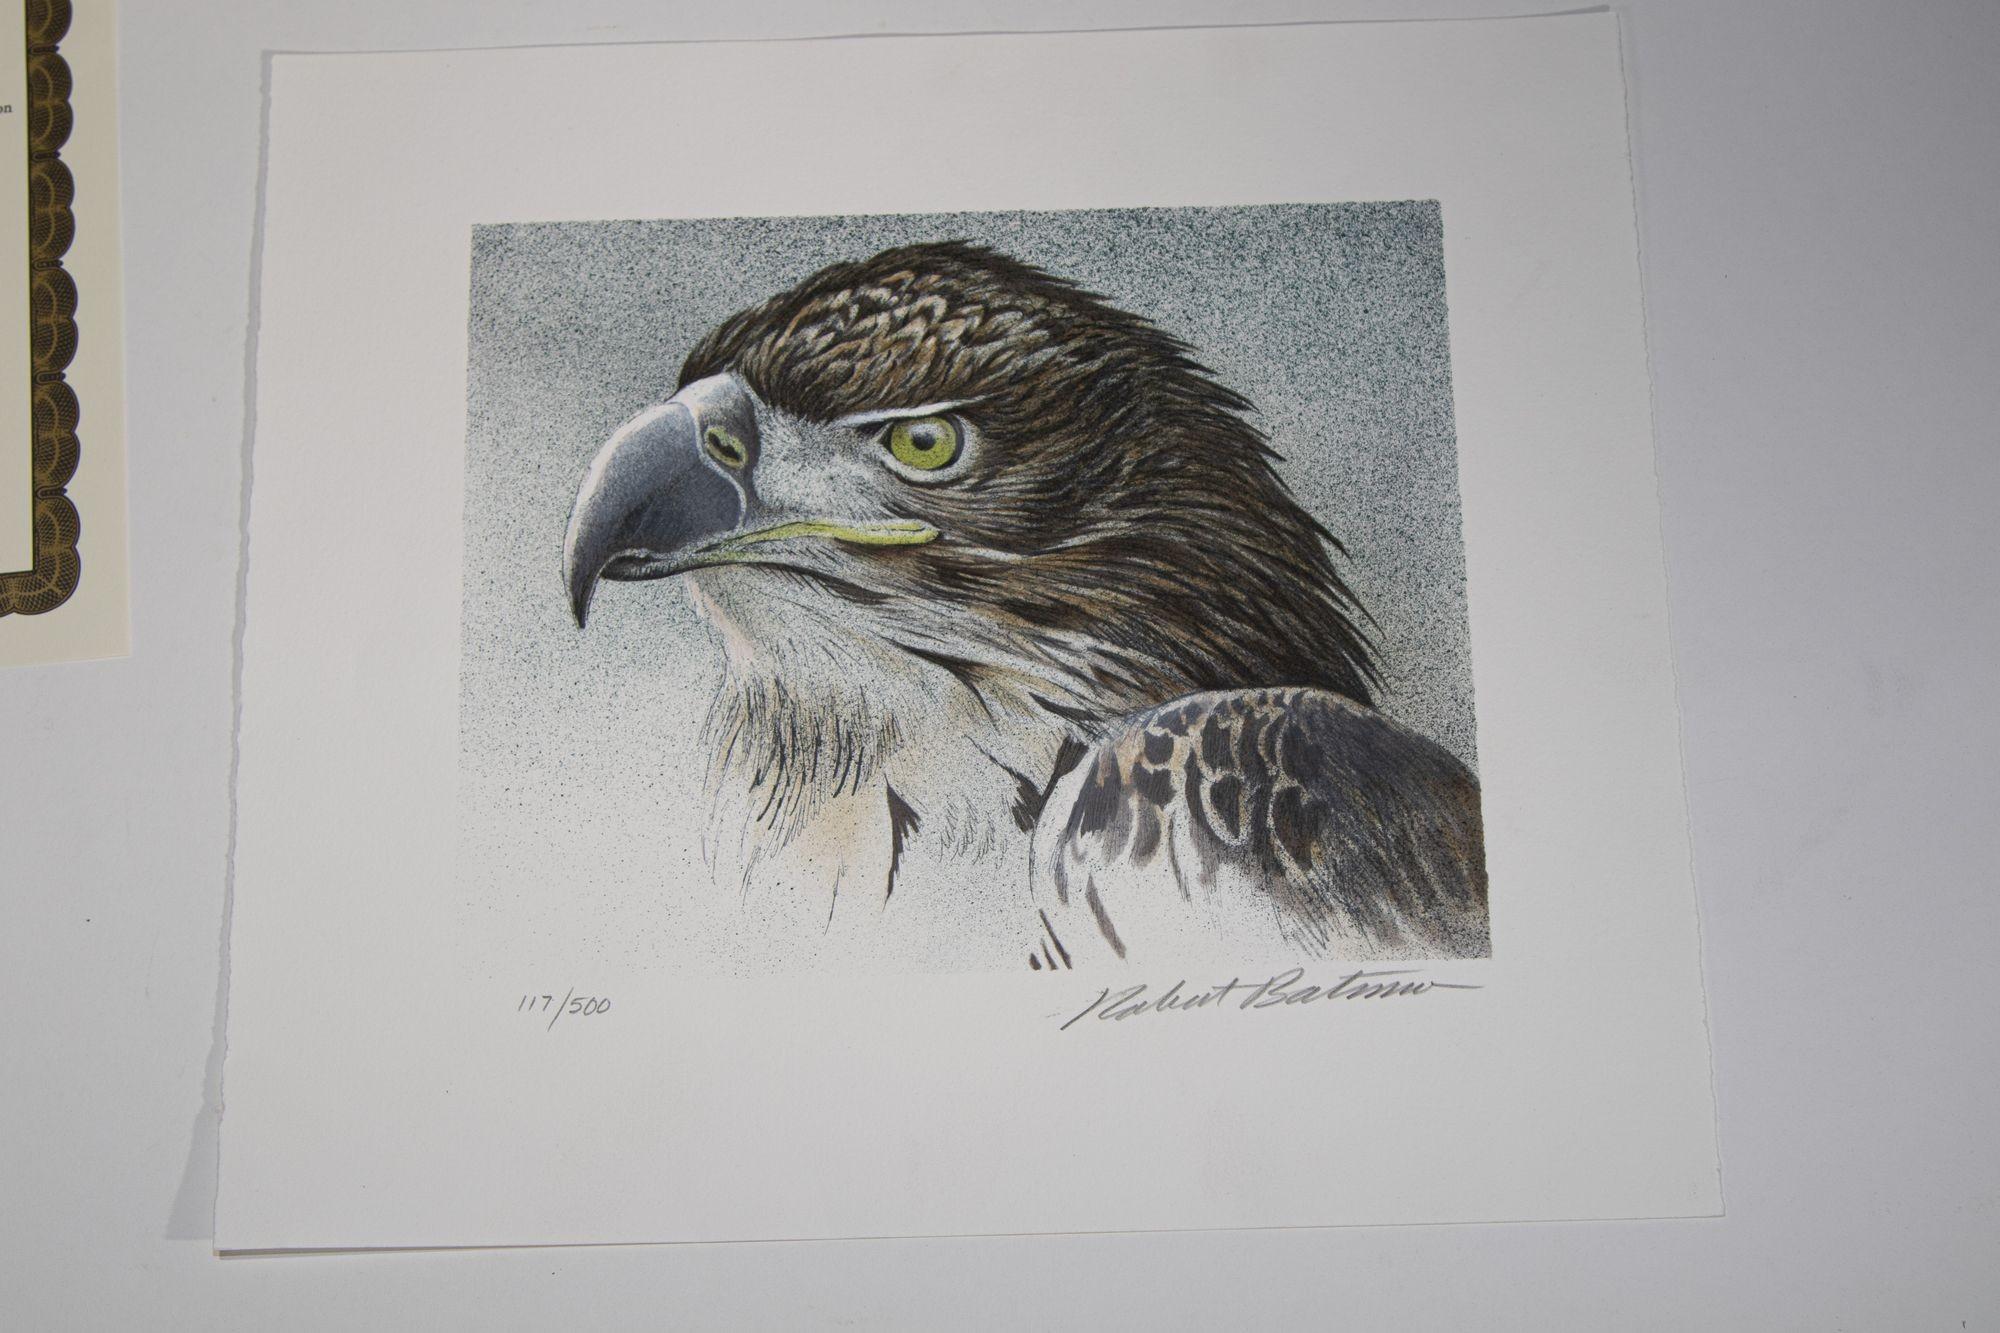 Vigilance Prestige Limited Edition, October 1993, eagle bust signed limited edition original lithograph, hand signed and numbered by Robert Bateman.
paper size is 14 in. x 12 in.
Image is 10 in. x 8 in.
Original lithograph limited edition of 500.